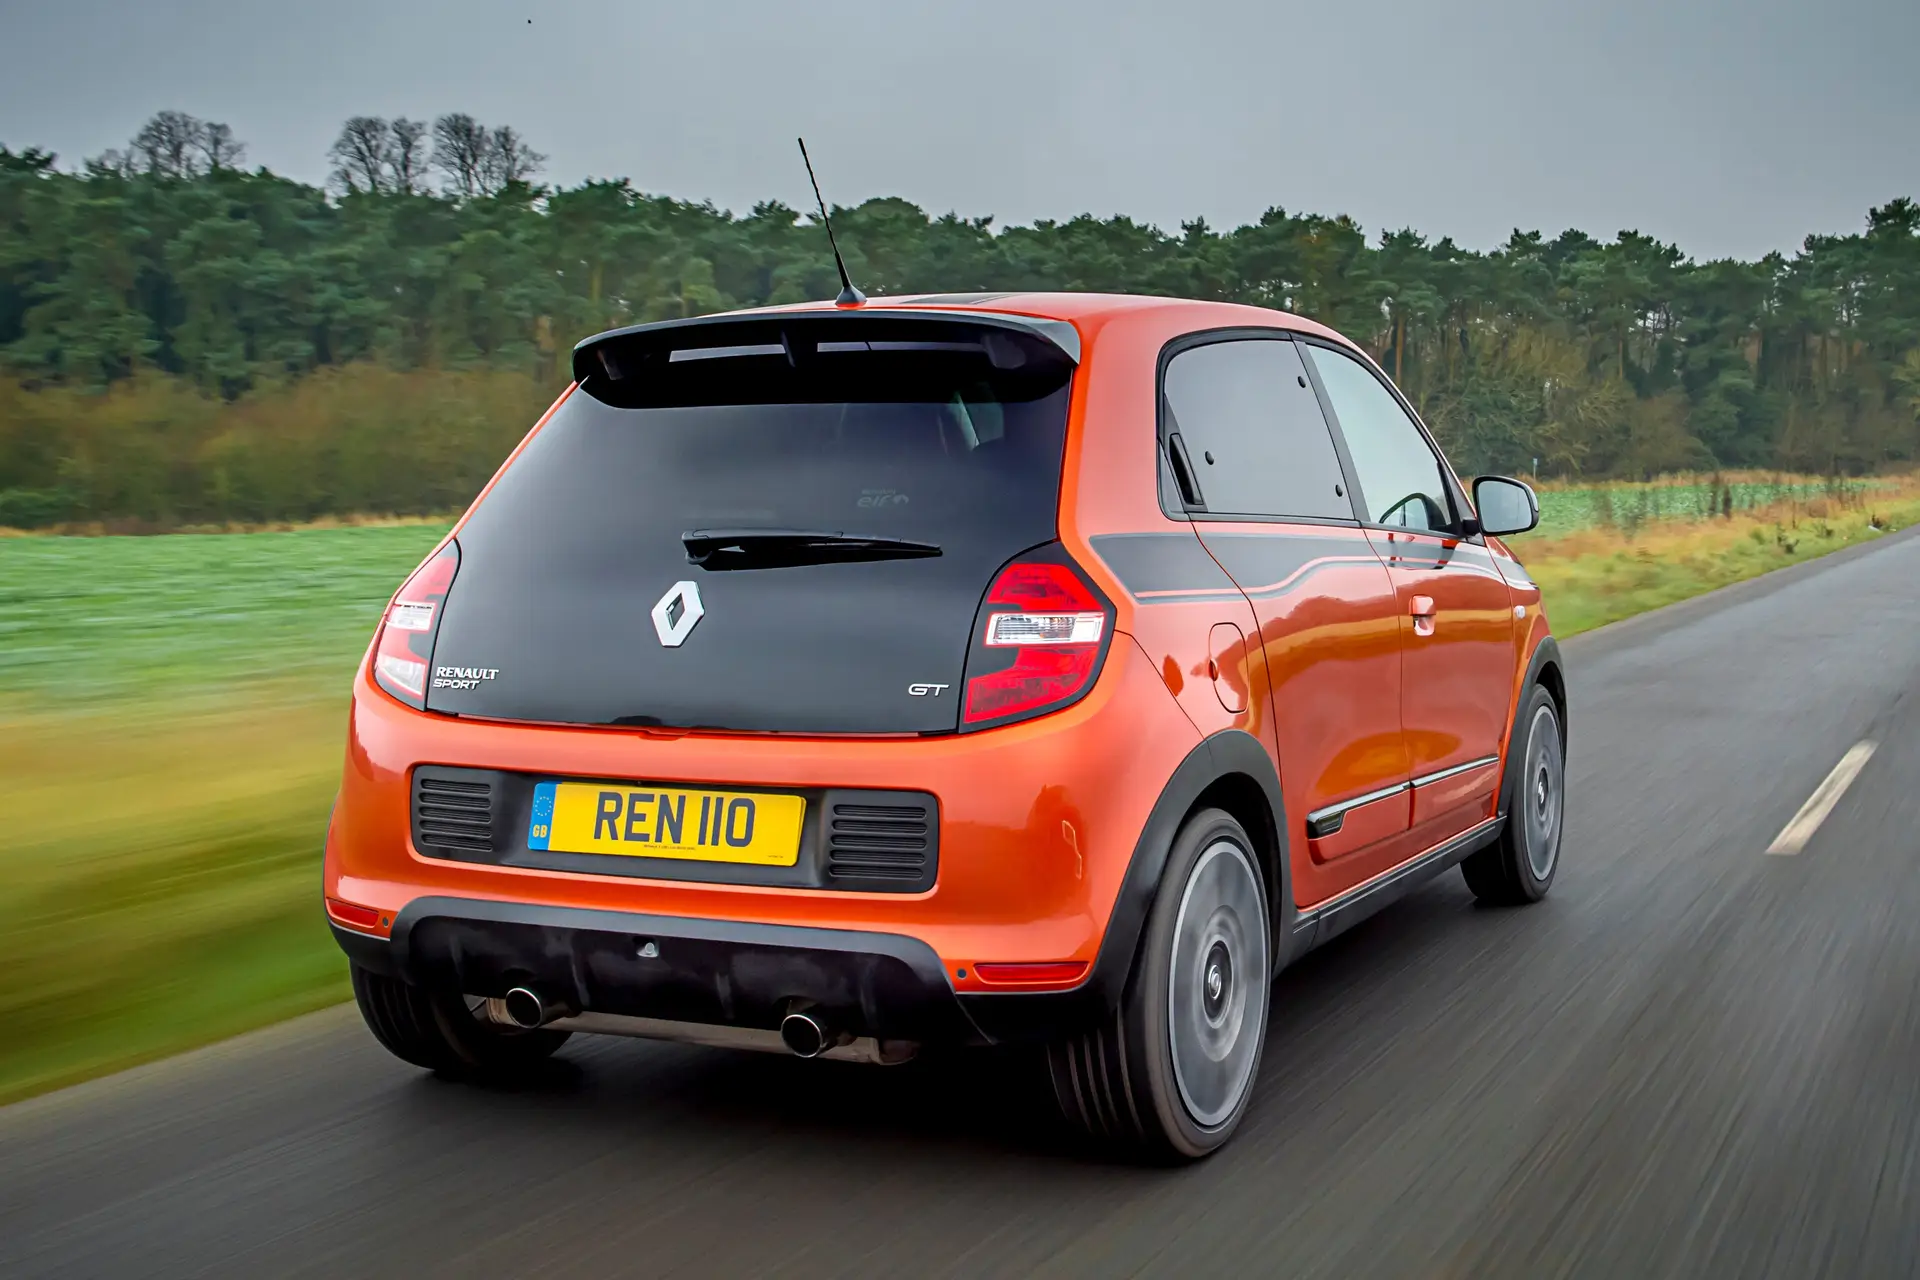 Renault Twingo (2014-2019) Review: exterior rear three quarter photo of the Renault Twingo on the road